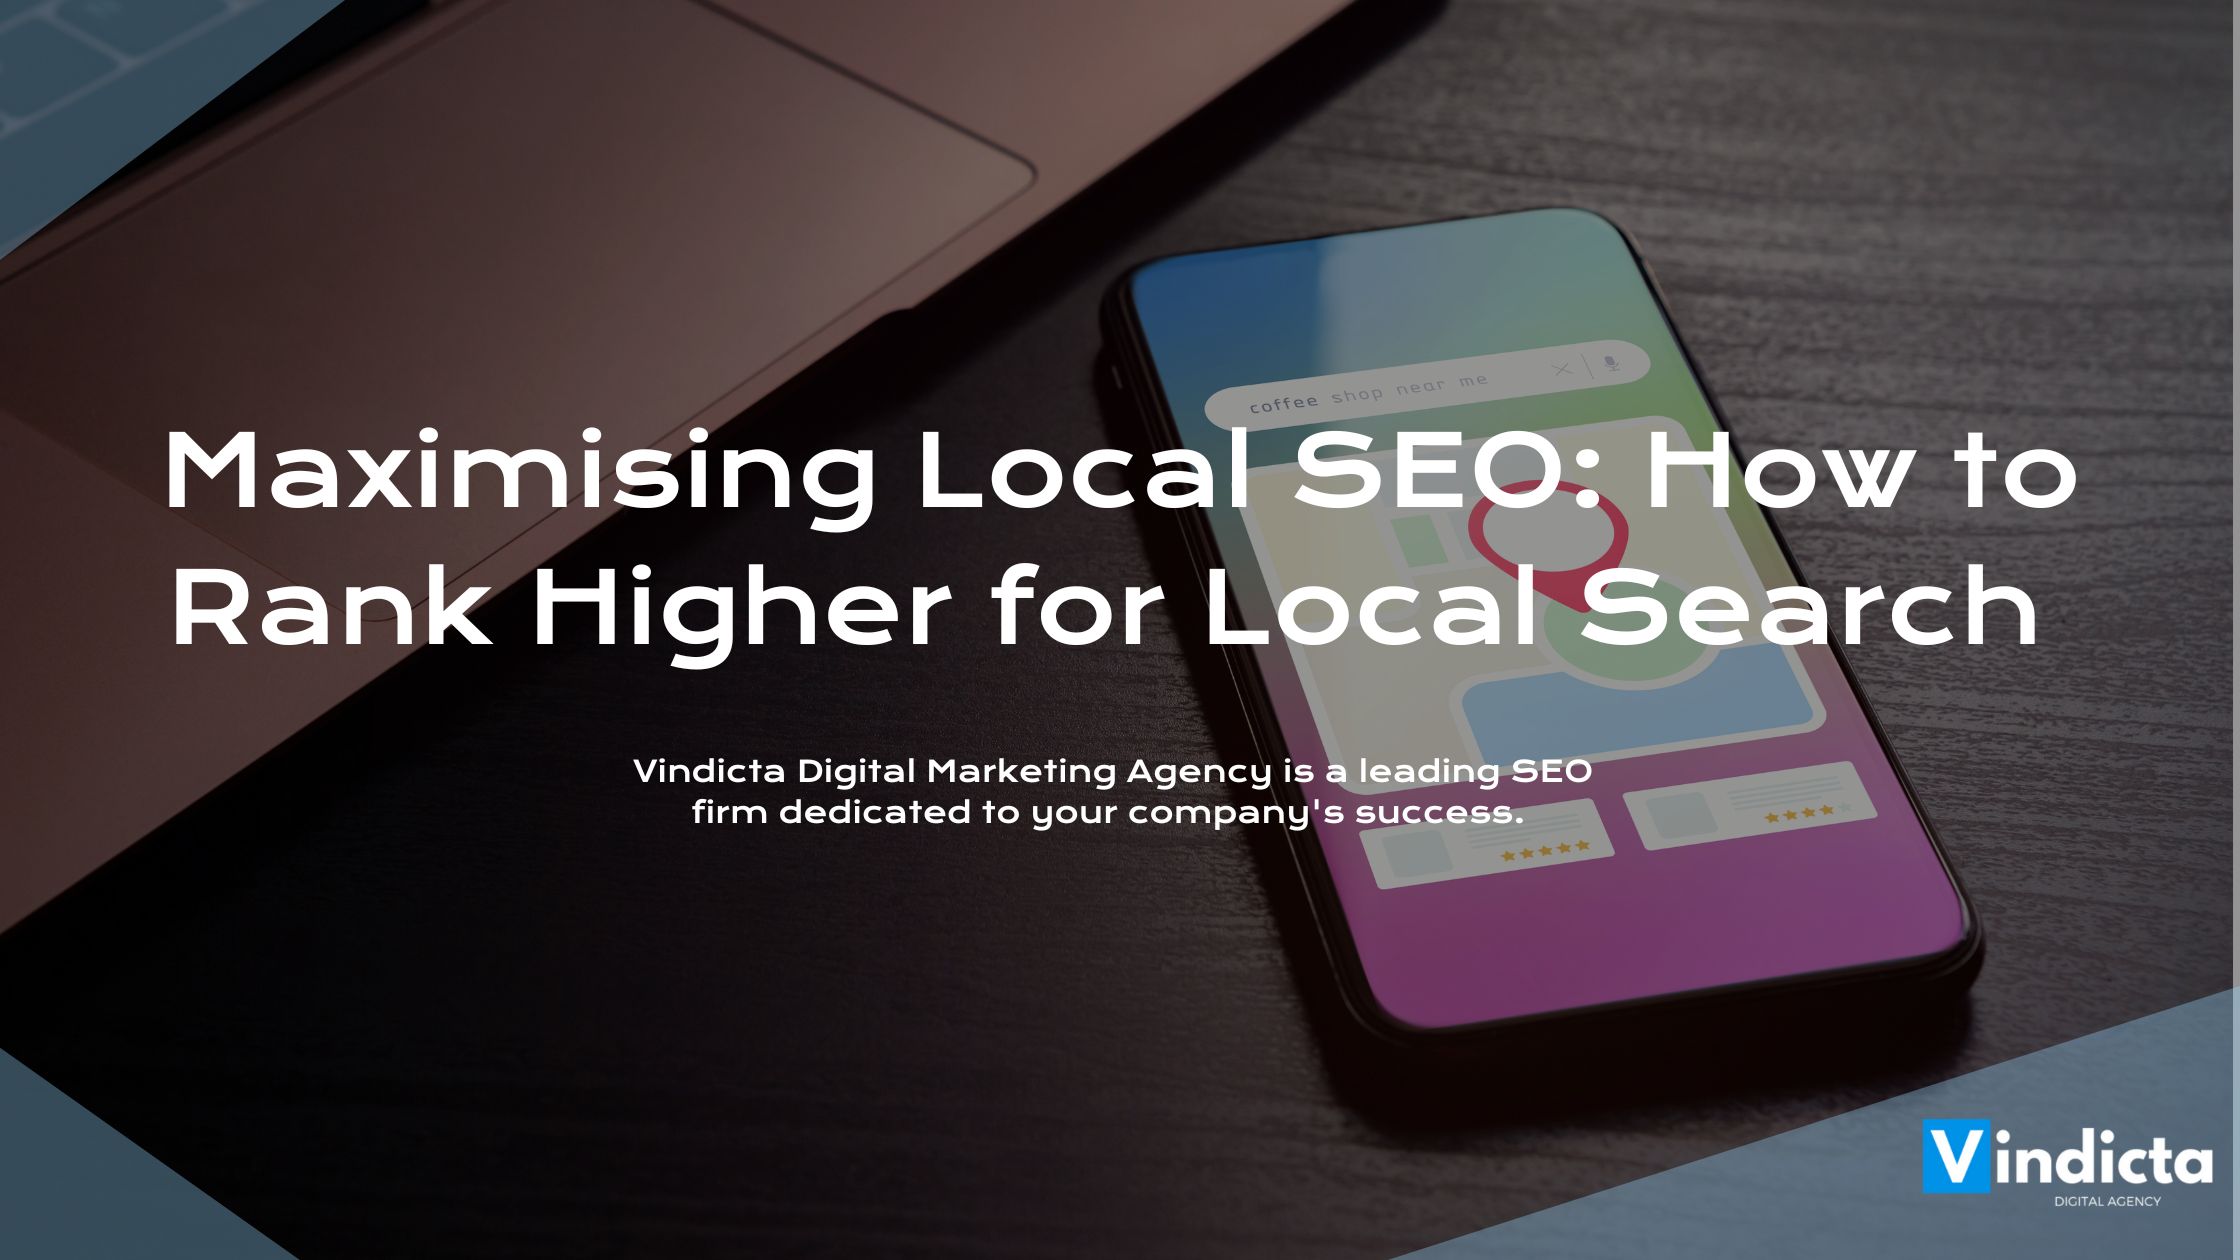 Maximising Local SEO: How to Rank Higher for Local Search